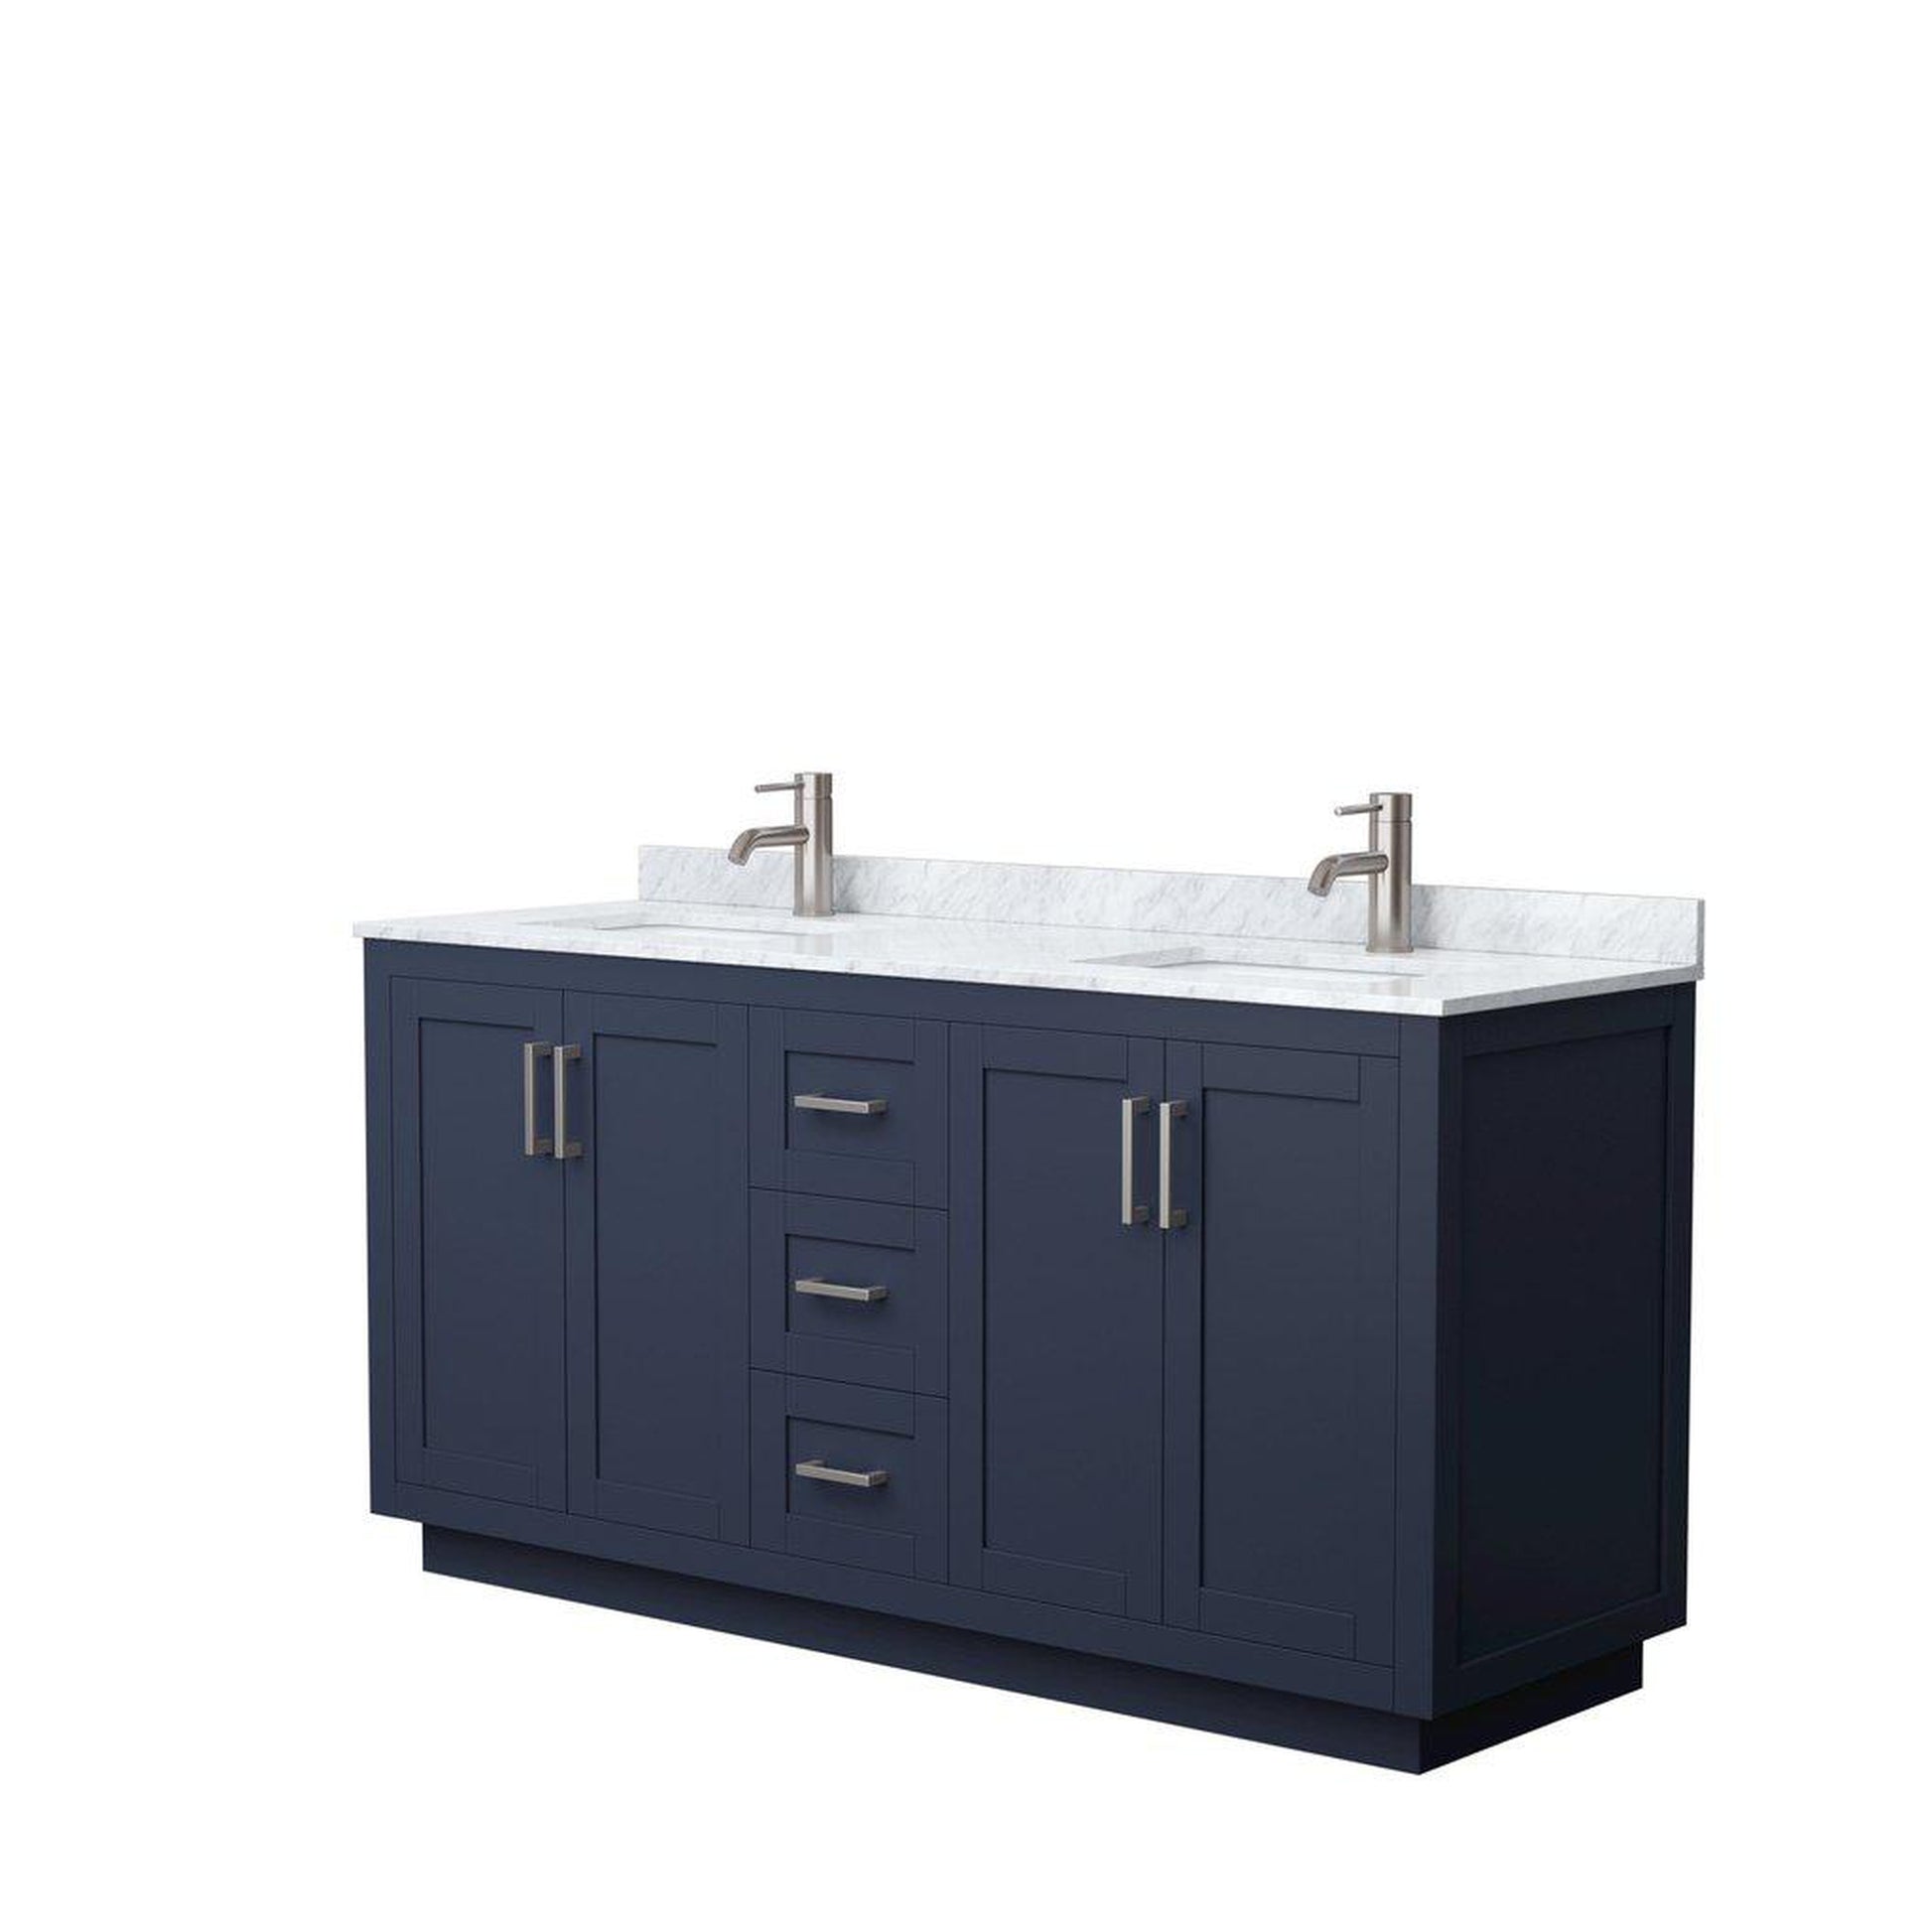 Wyndham Collection Miranda 66" Double Bathroom Dark Blue Vanity Set With White Carrara Marble Countertop, Undermount Square Sink, And Brushed Nickel Trim